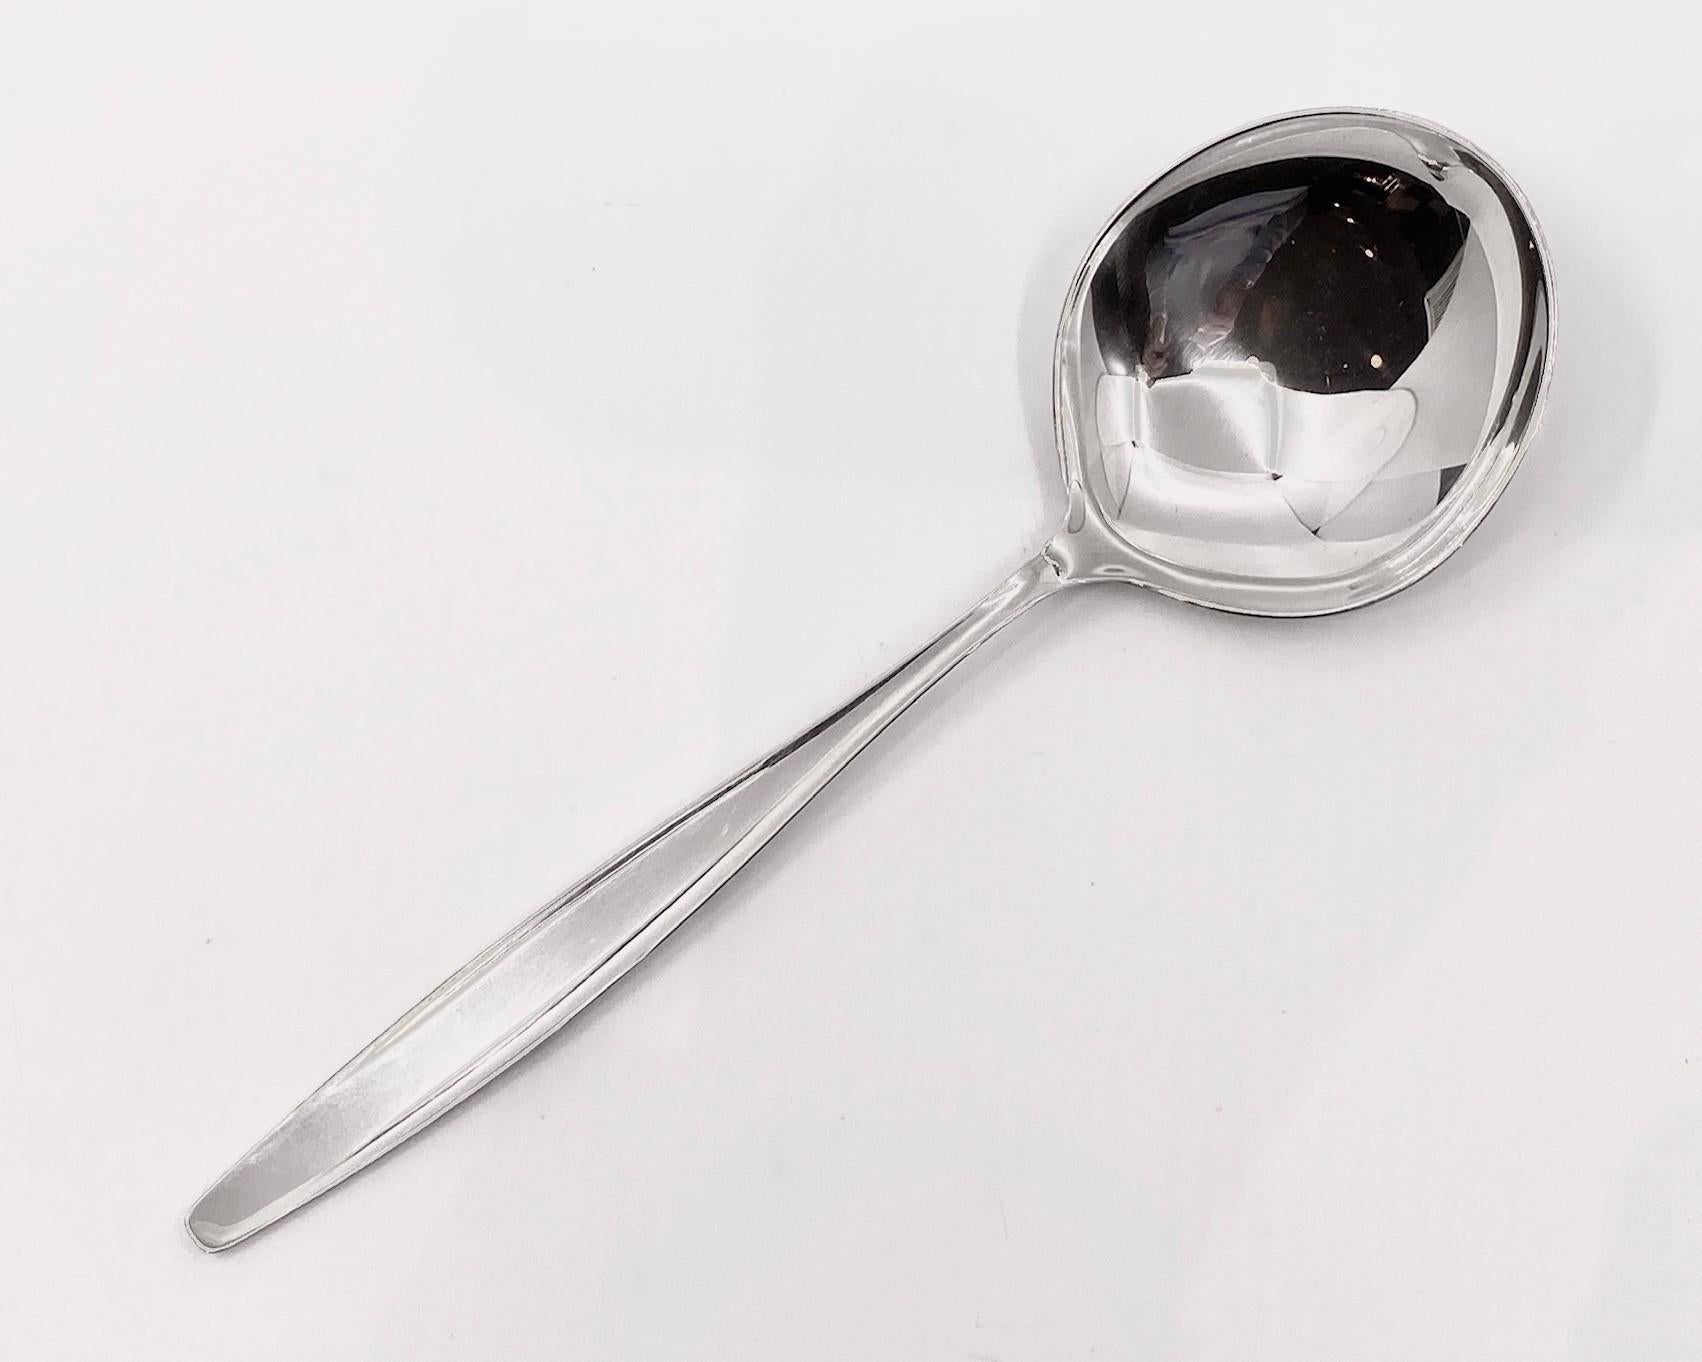 Georg Jensen sterling serving spoon, item 115 in the Cypress pattern, design #99 by Tias Eckhoff. Norwegian designer Tias Eckhoff’s Cypress was the winning design in a competition to design a flatware pattern for the 50th anniversary of the Georg